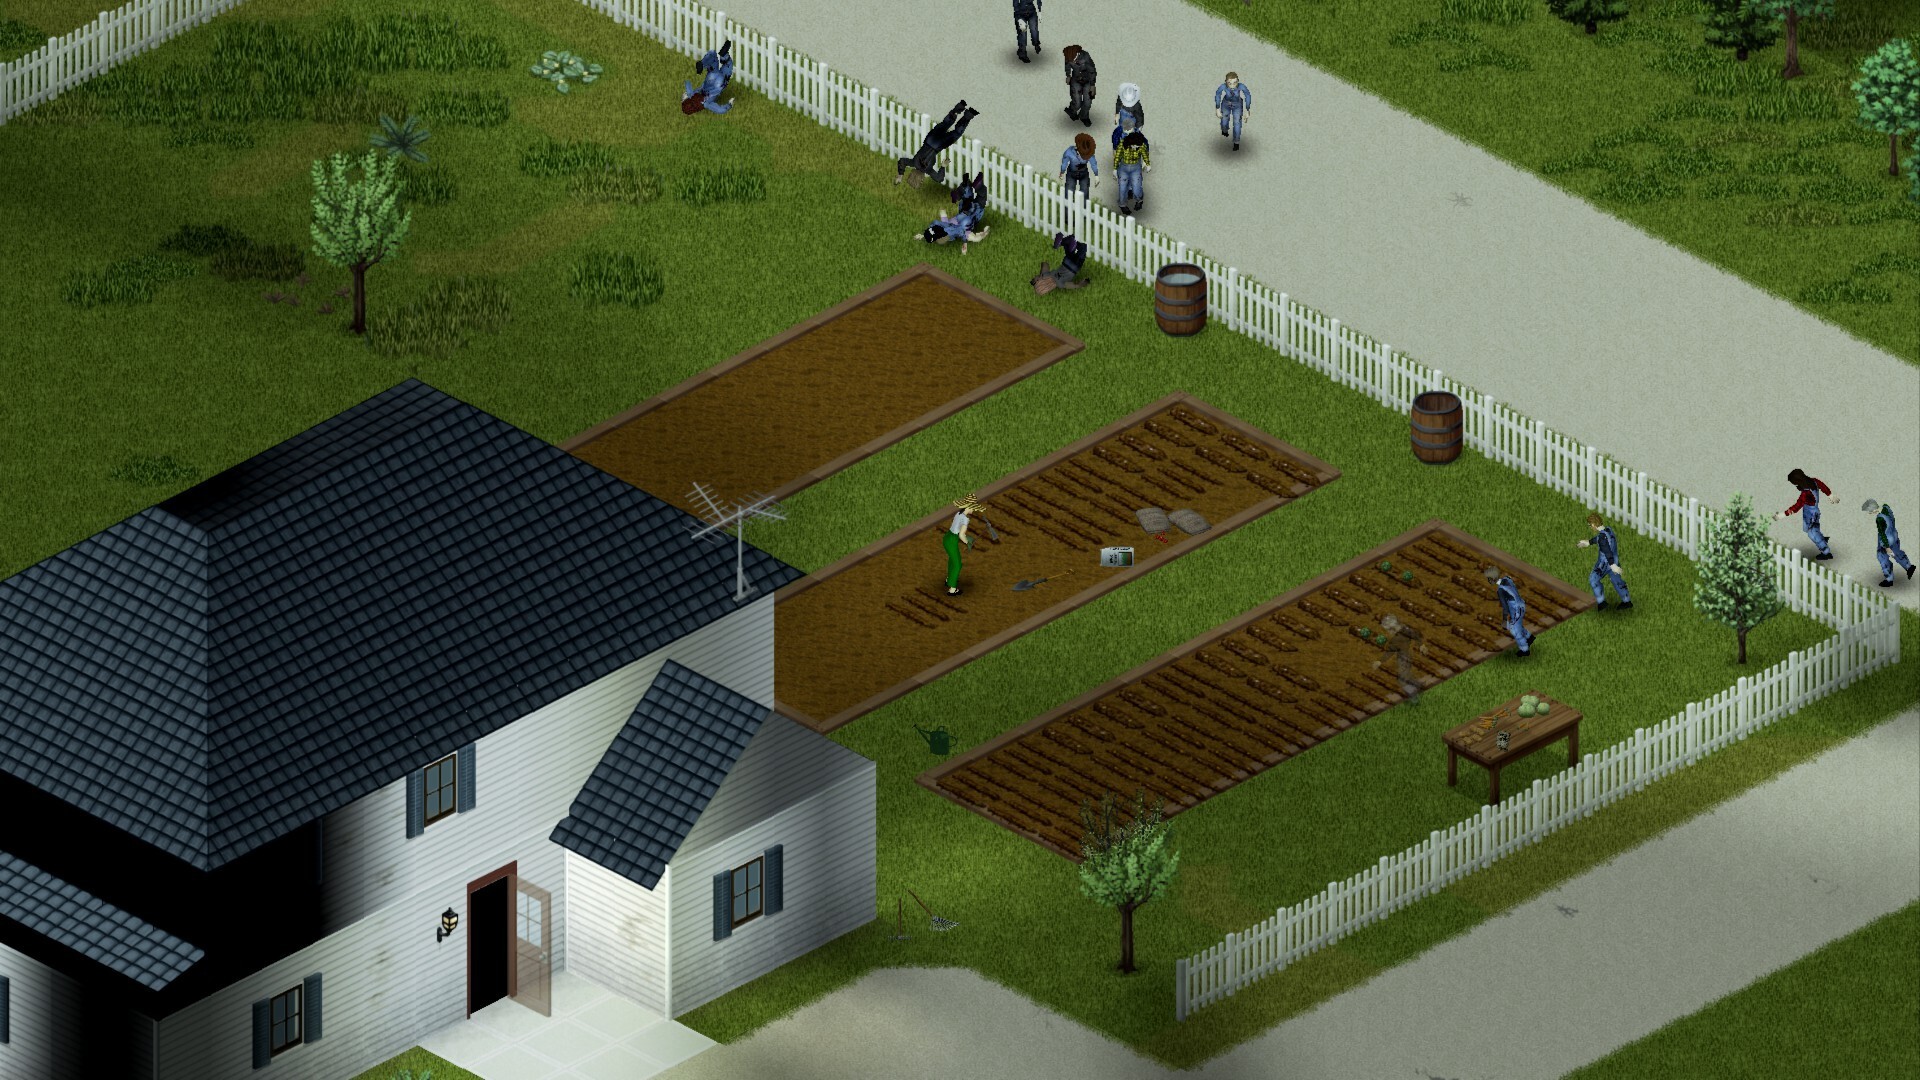 Project Zomboid, Software